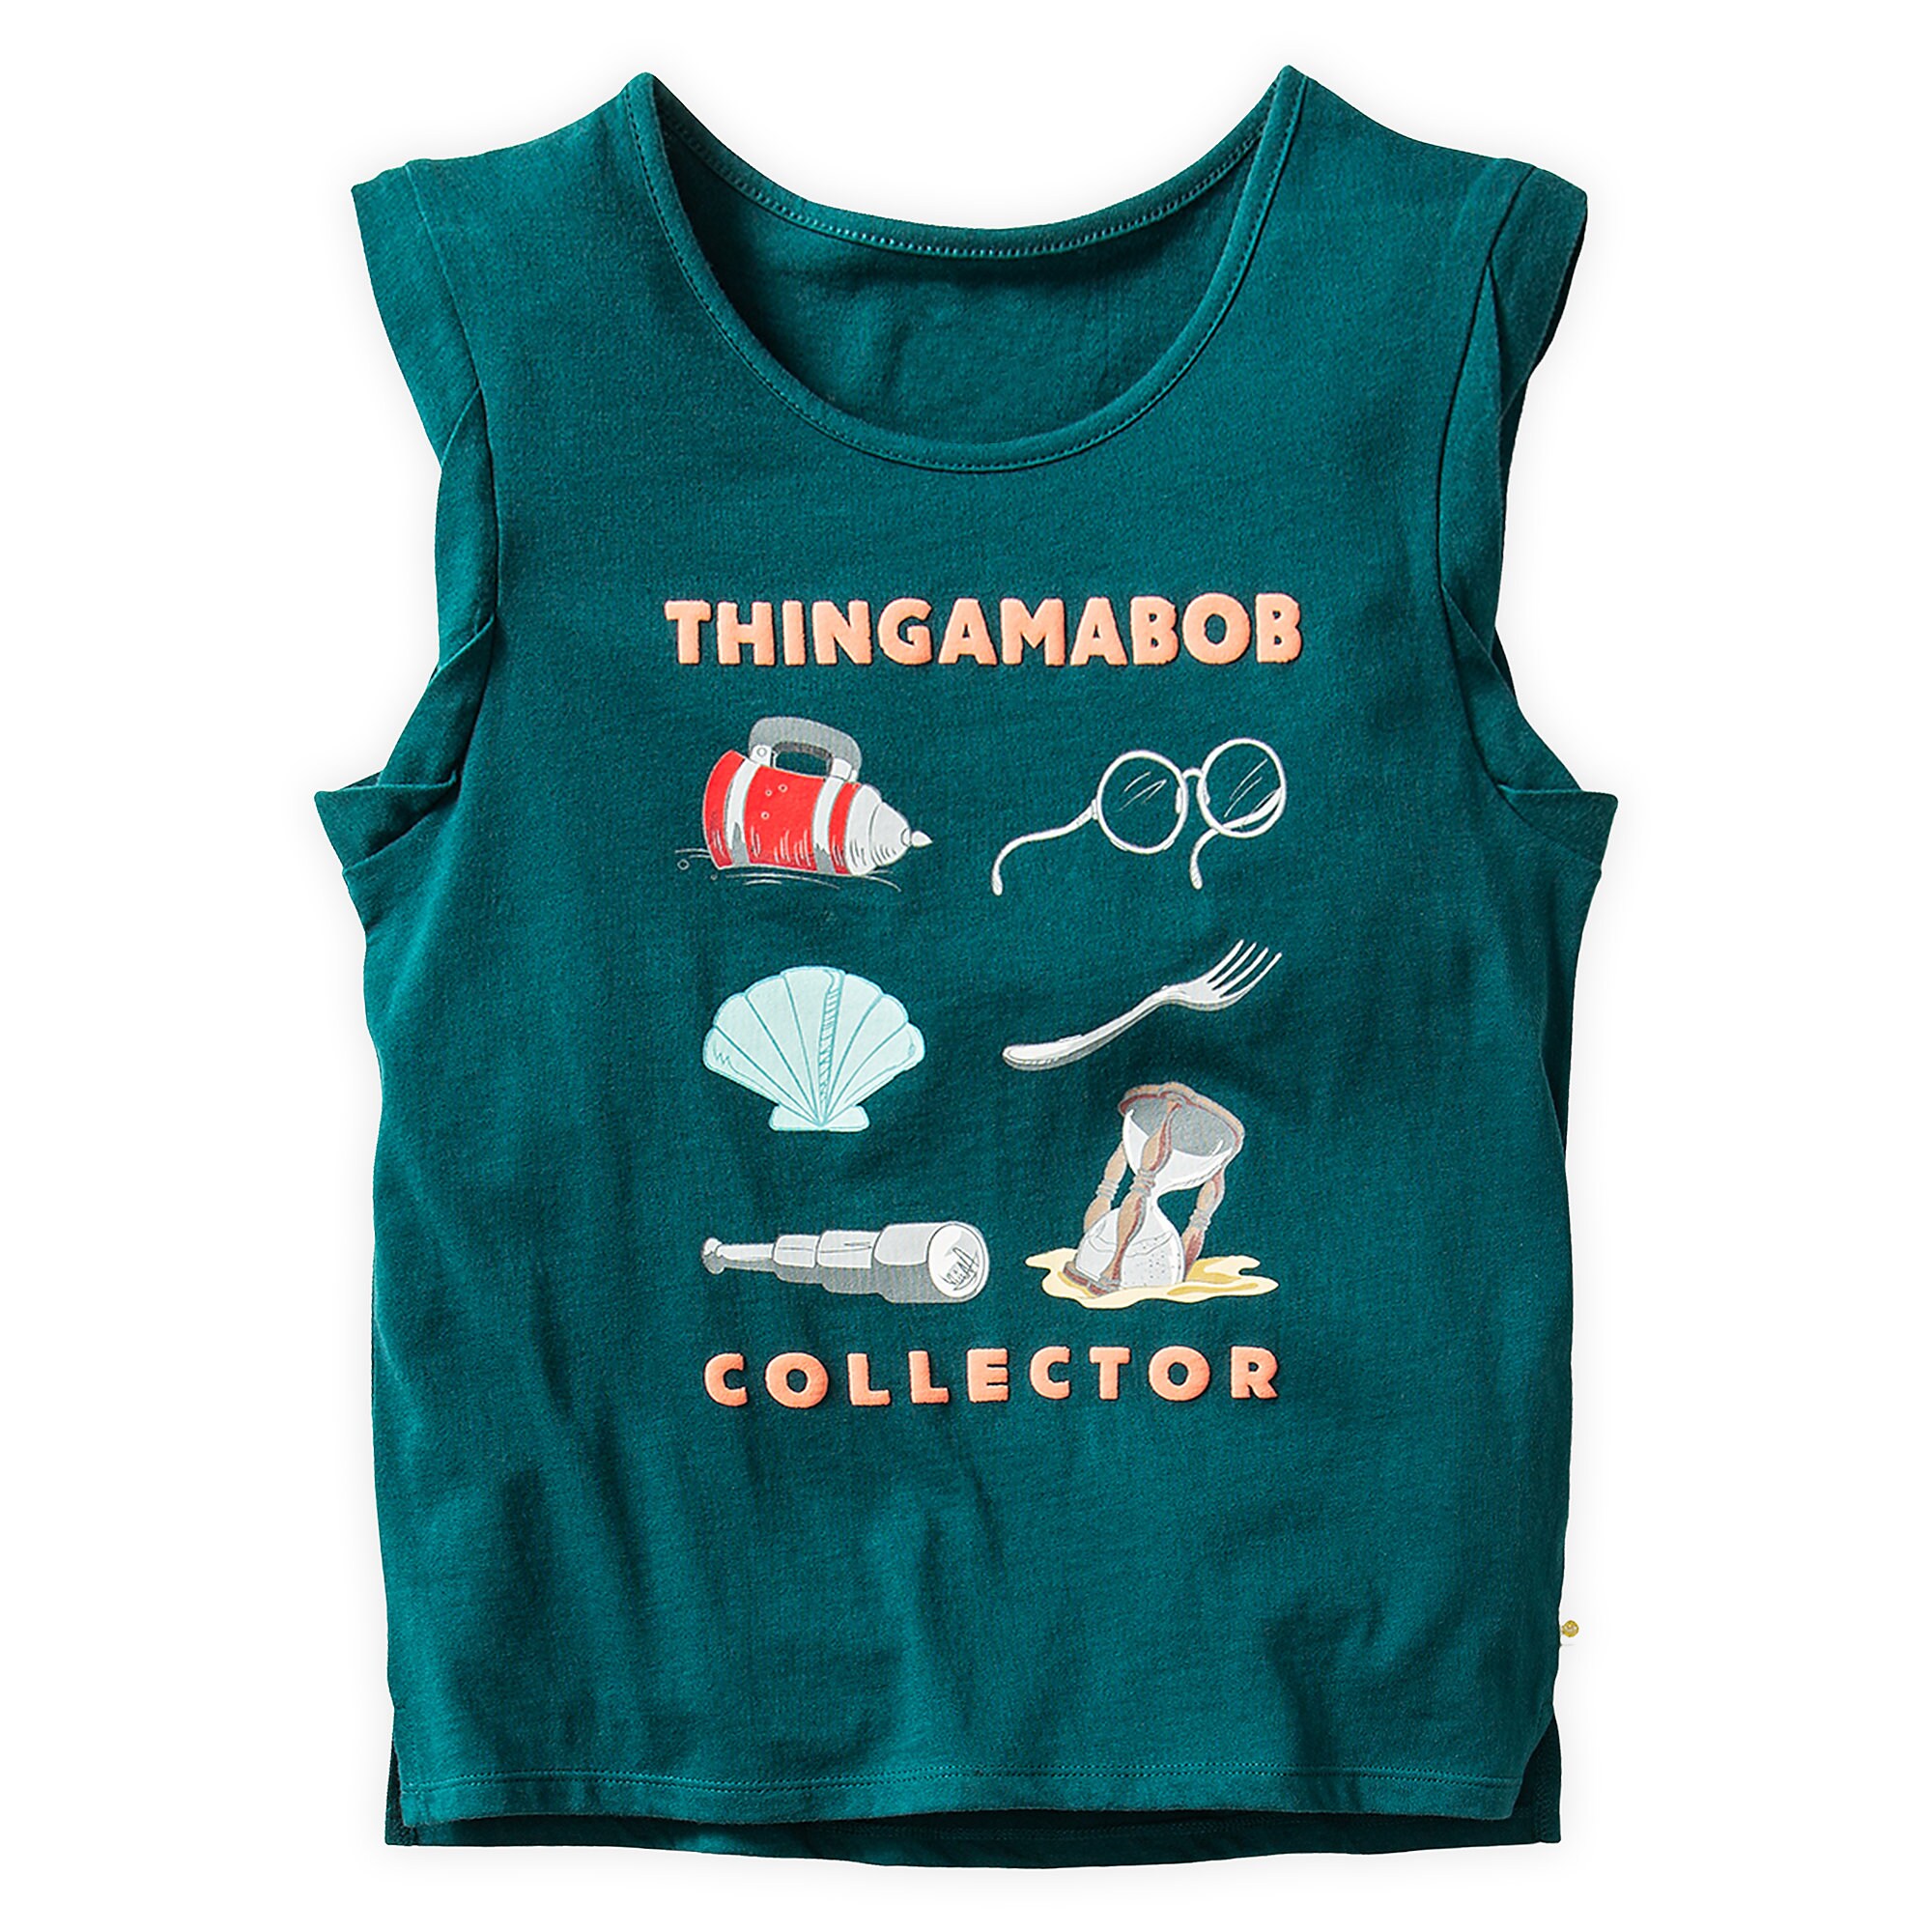 The Little Mermaid ''Thingamabob Collector'' Tank Top for Girls by ROXY Girl